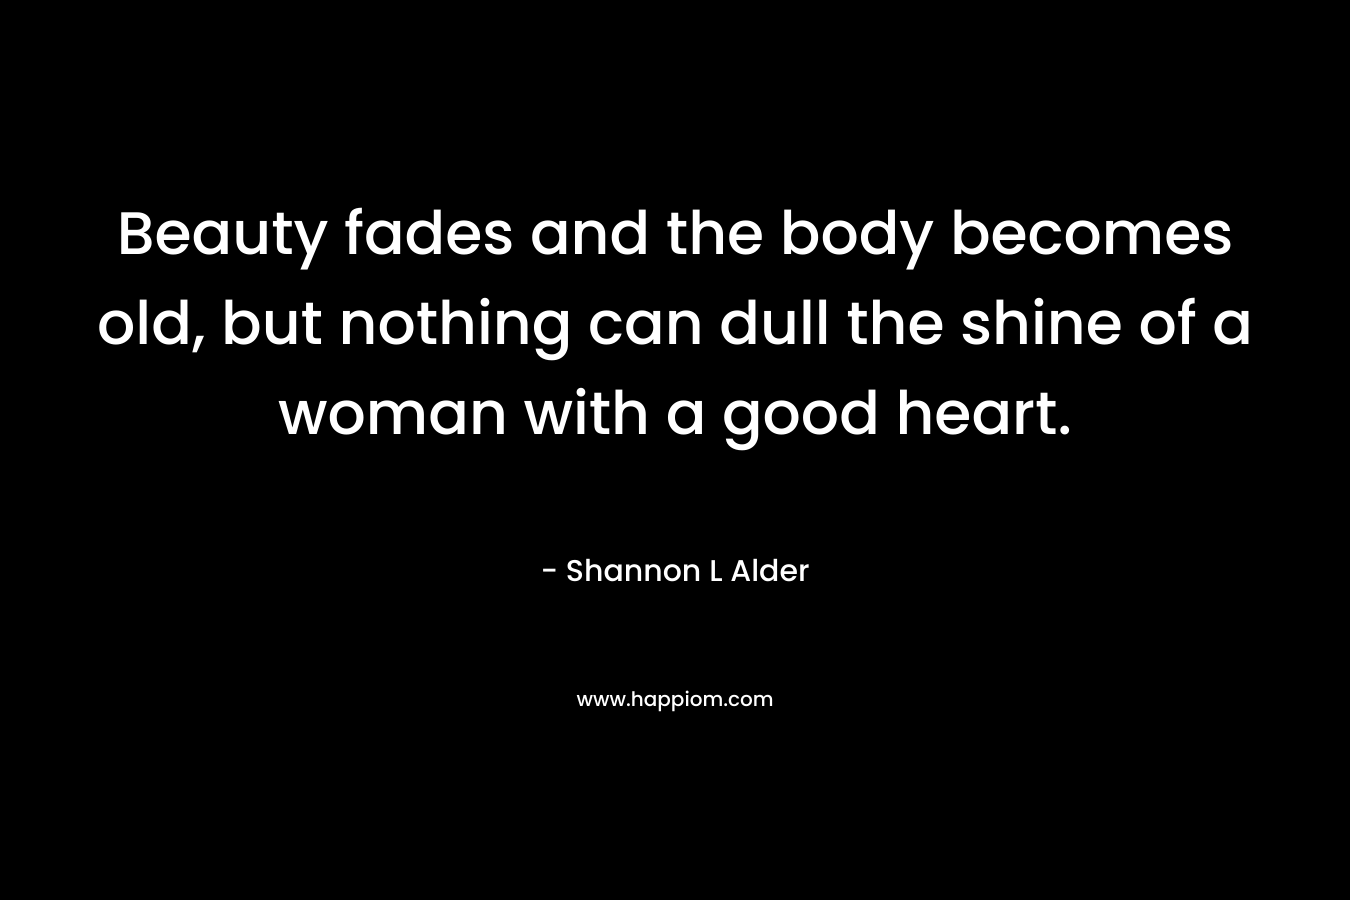 Beauty fades and the body becomes old, but nothing can dull the shine of a woman with a good heart.